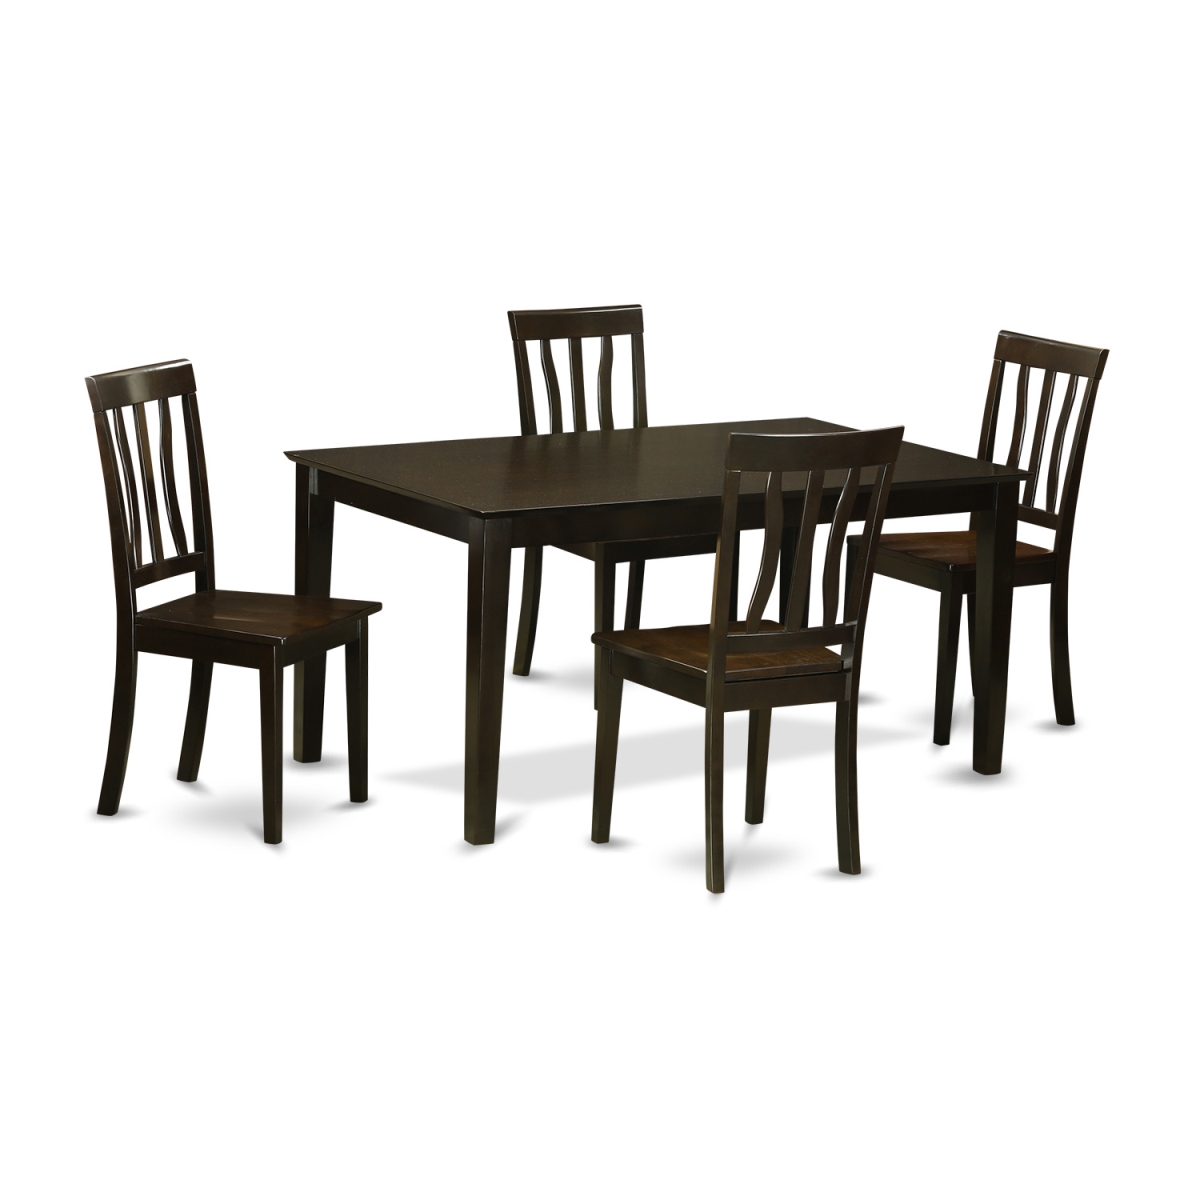 Picture of East West Furniture CAAN5-CAP-W Table Set with 4 Table & 4 Wood Seat Chairs - 5 Piece